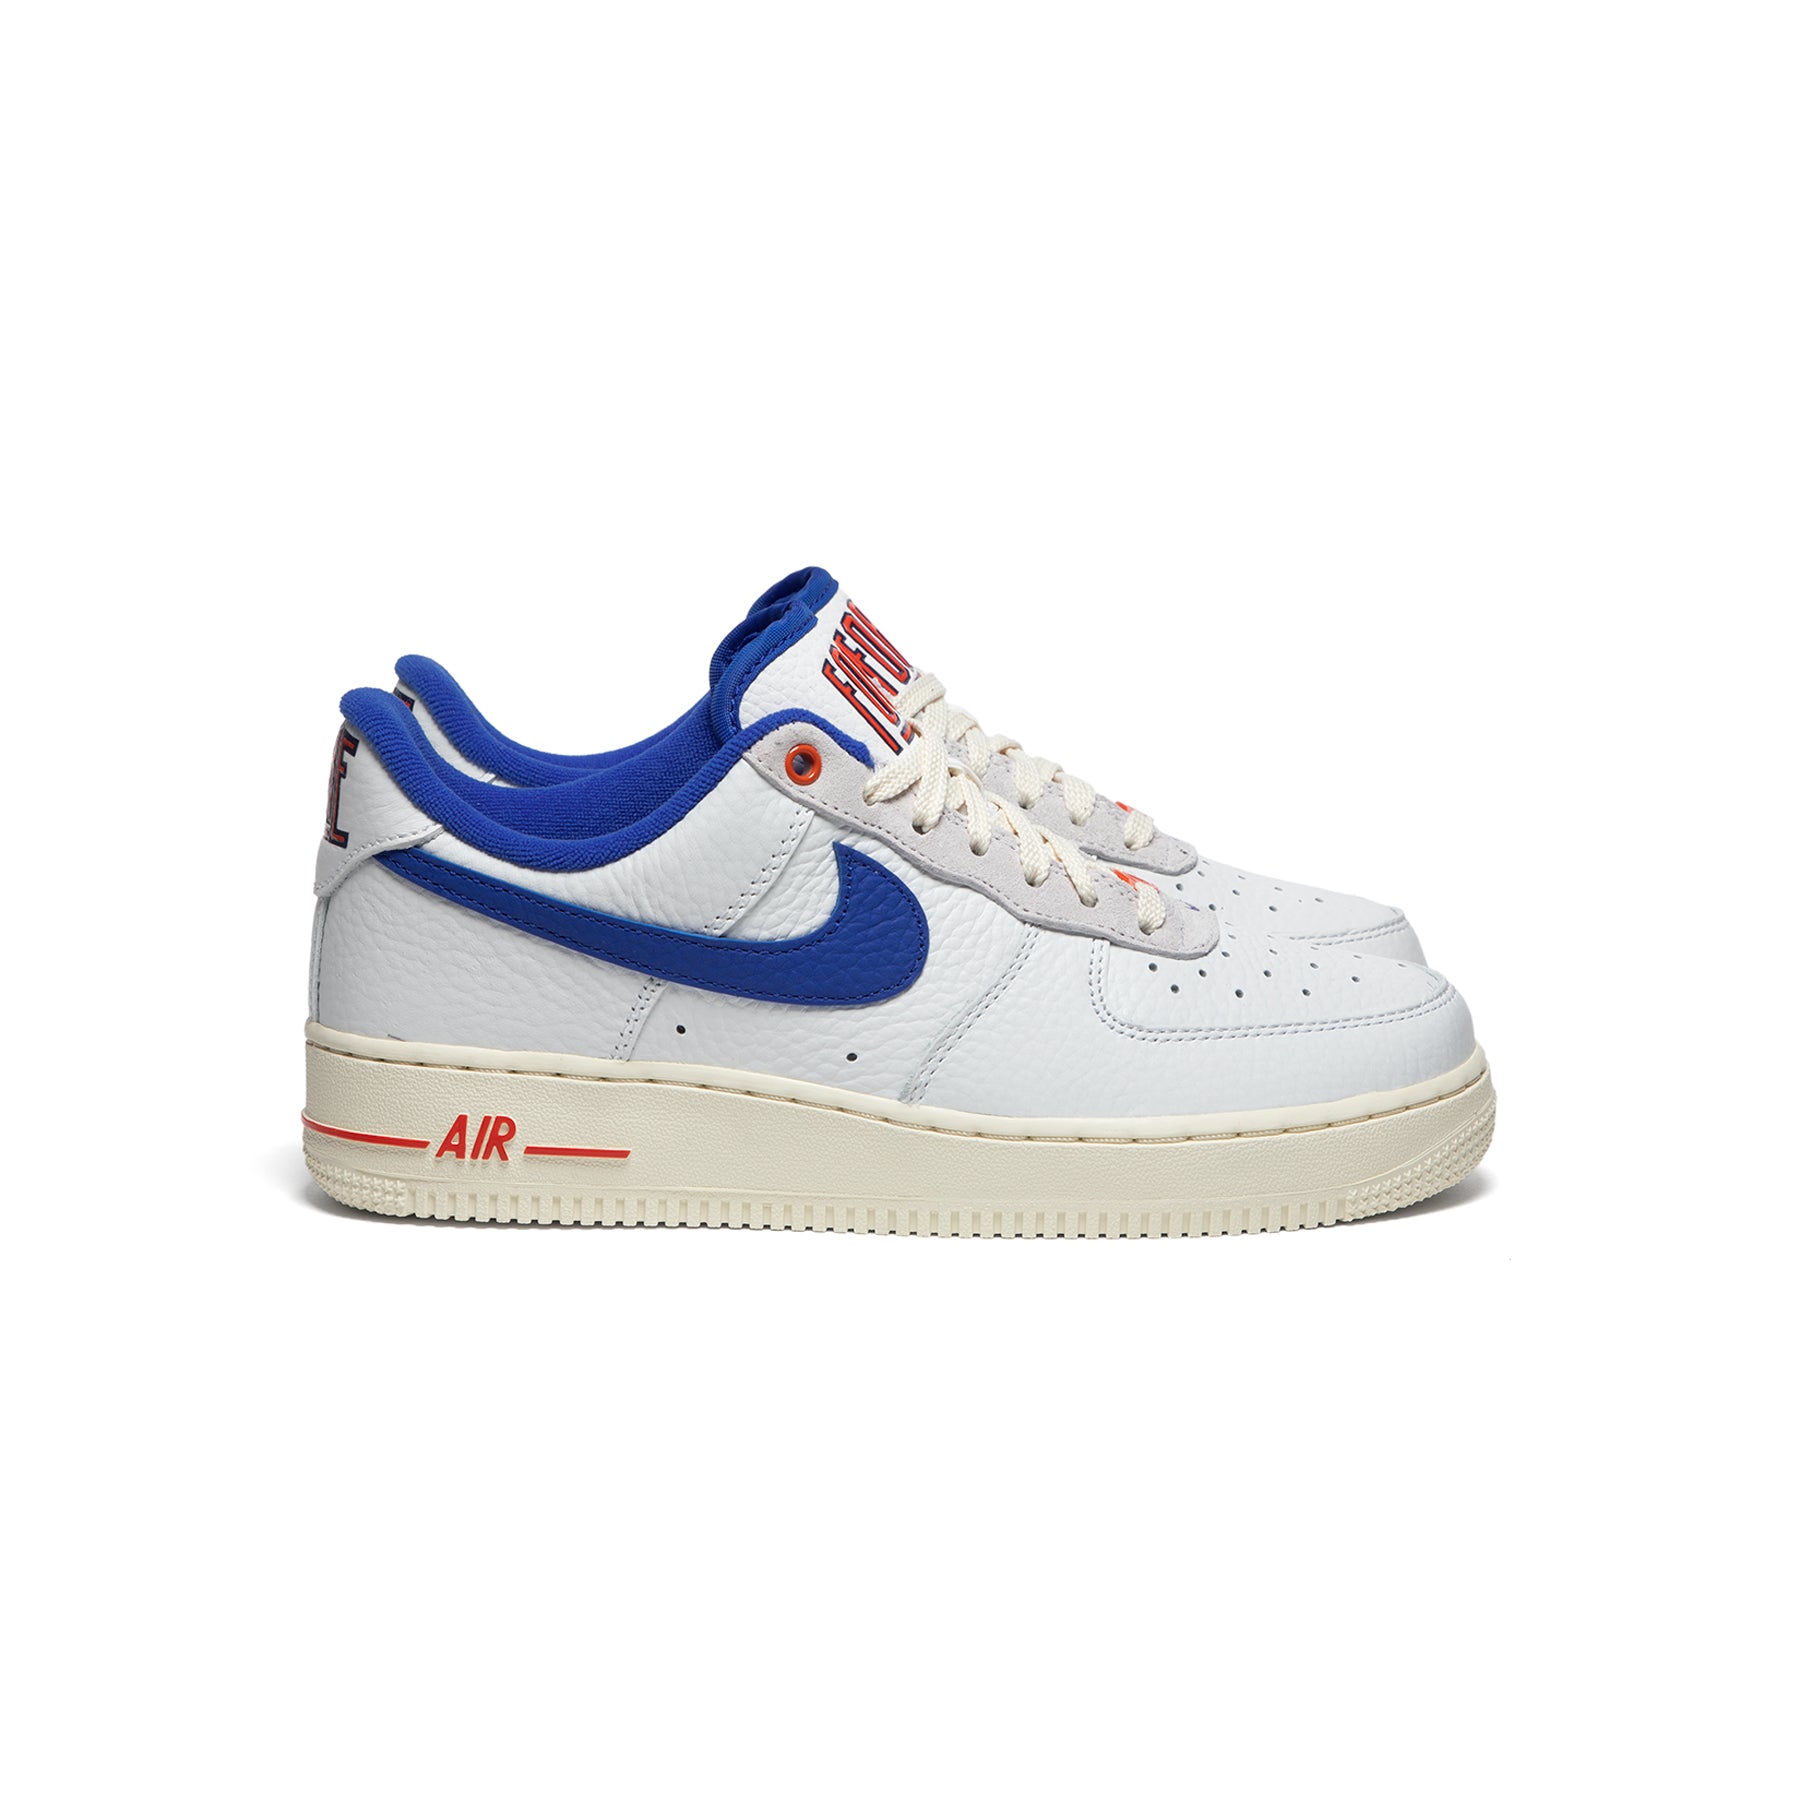 Nike Womens Air Force 1 '07 (Summit White/Hyper Royal/Picante Concepts